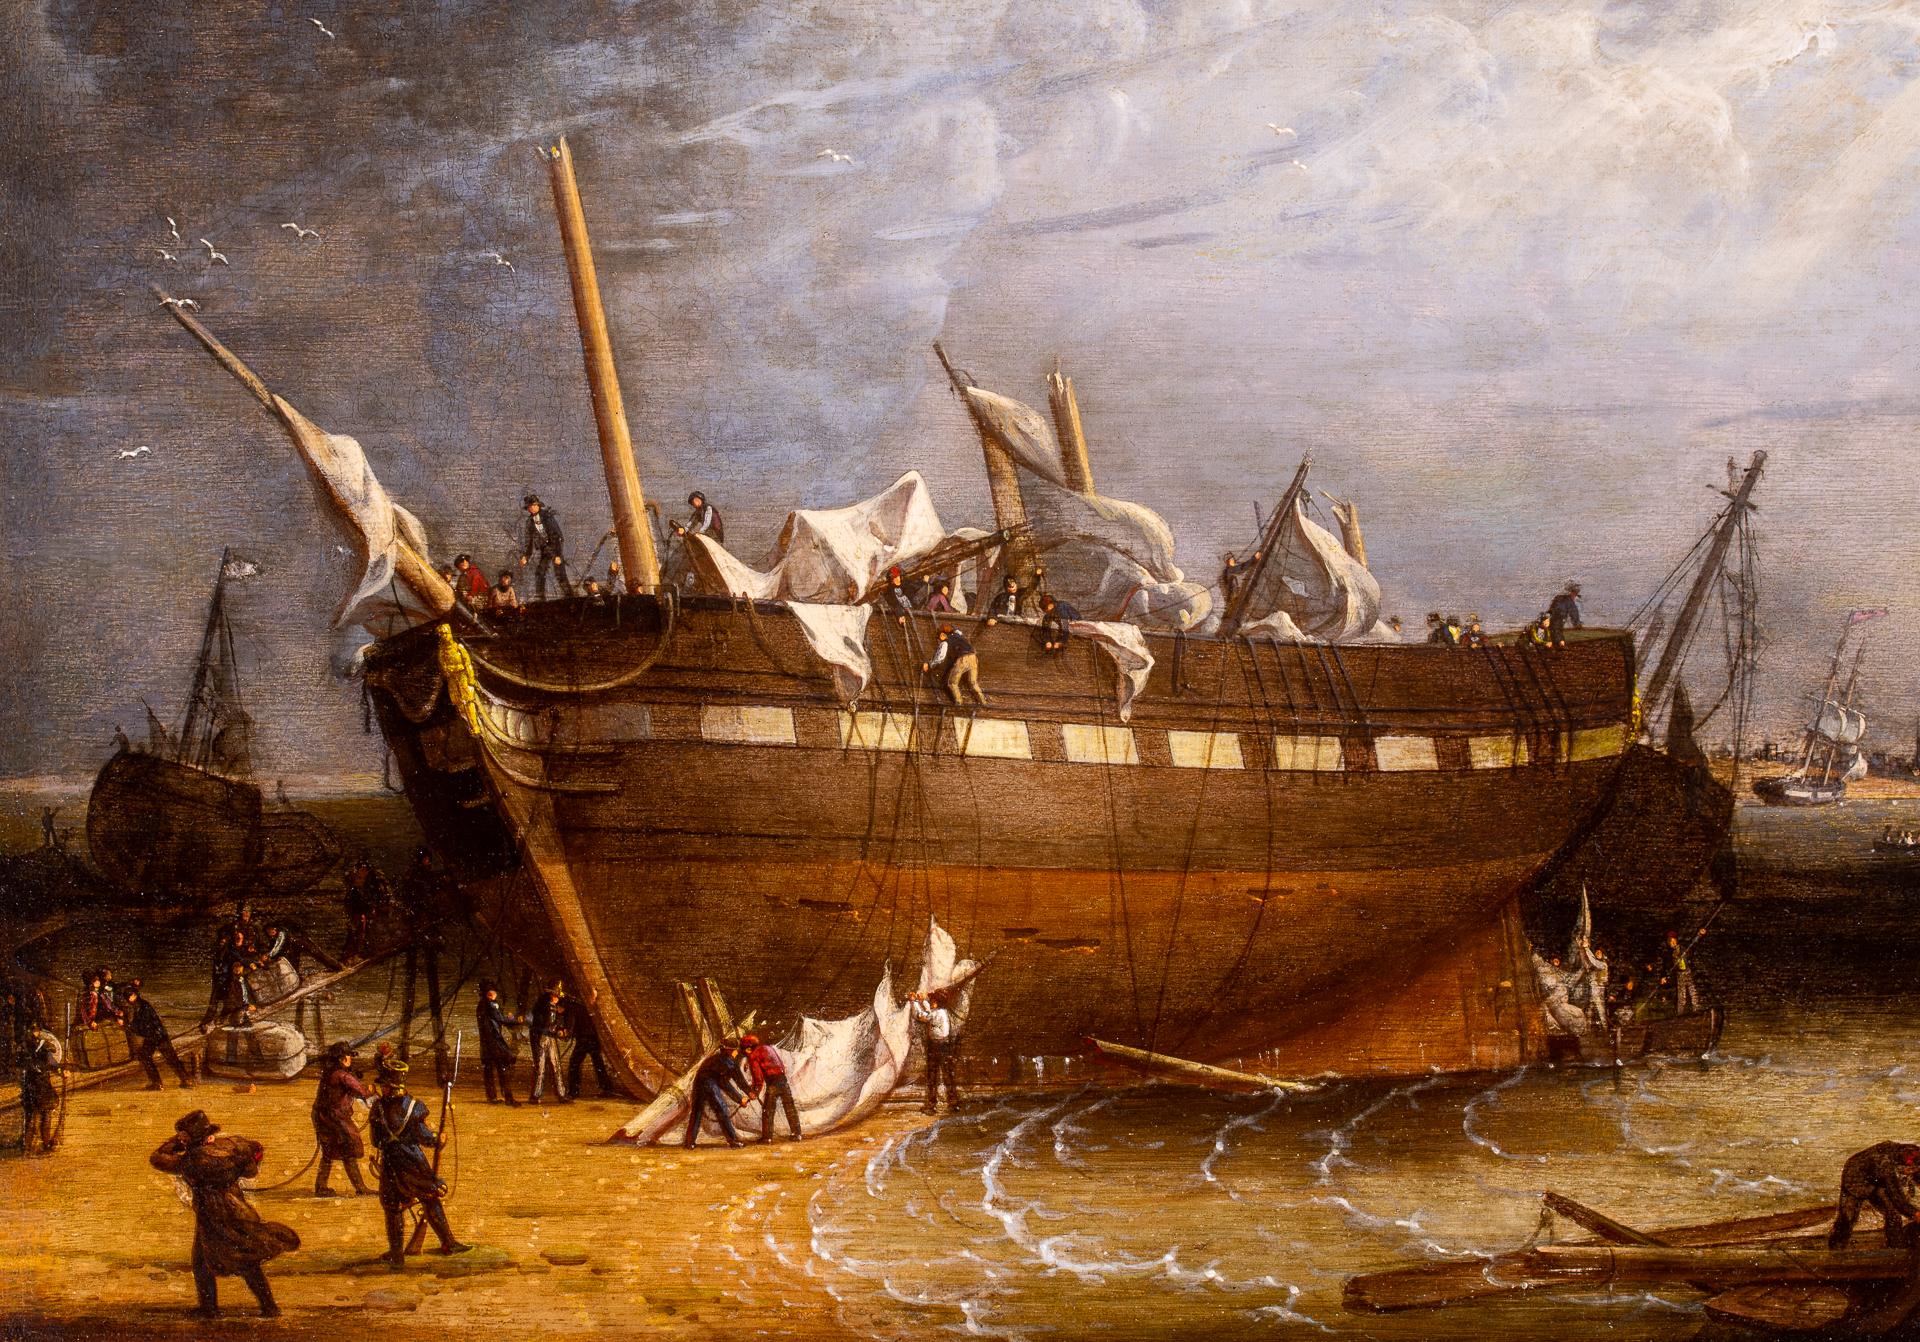 Aftermath of a Tyne River Storm - Painting by Robert Salmon